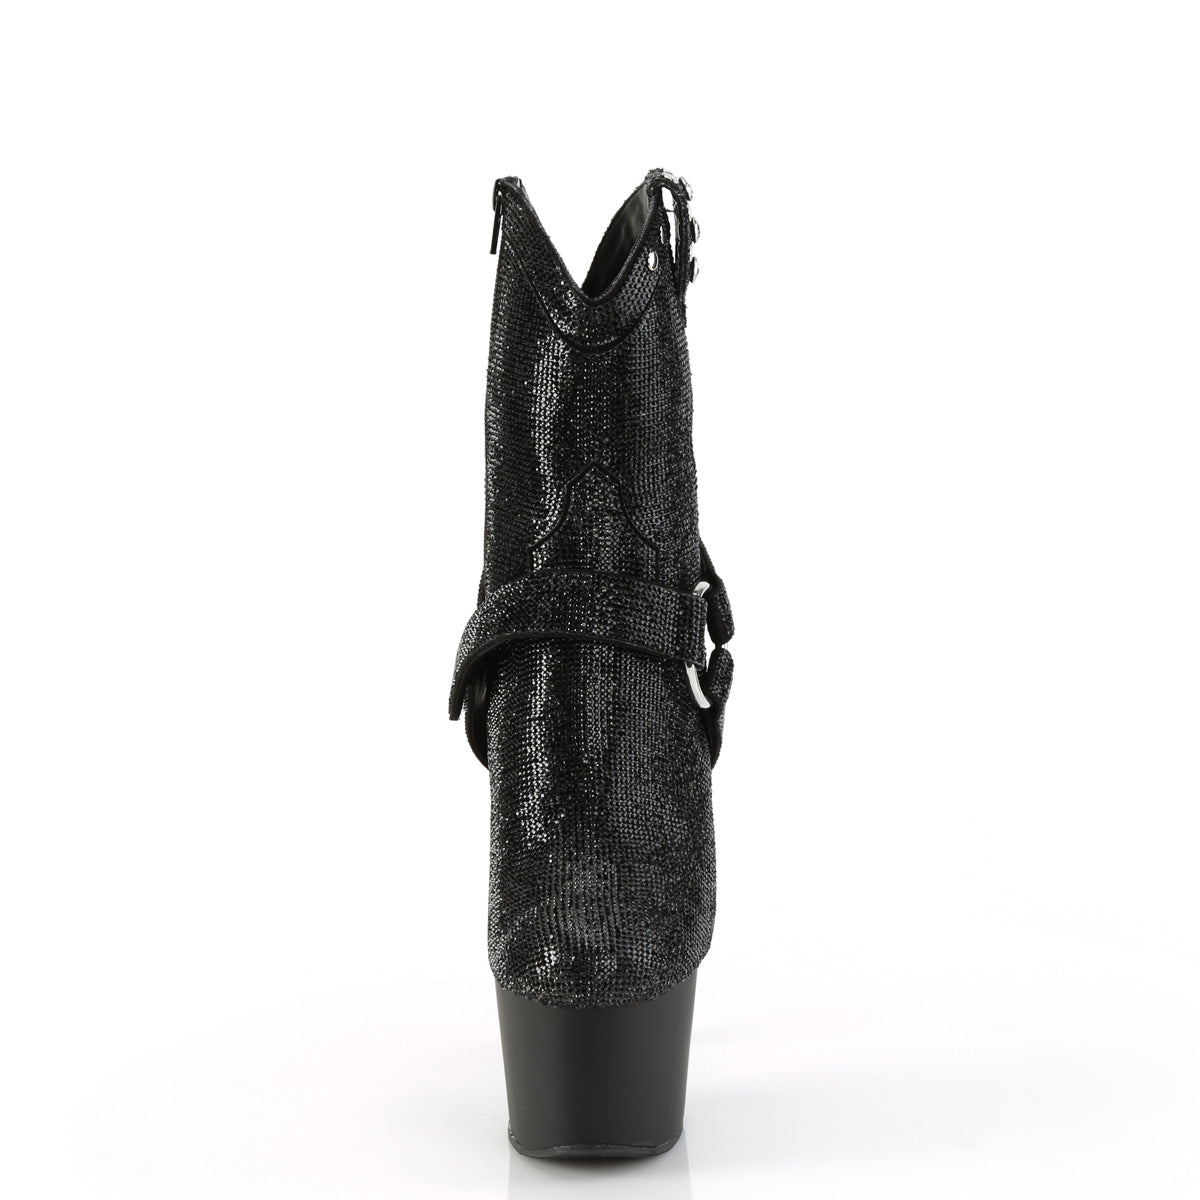 Cowgirl Pole Dancer Boots